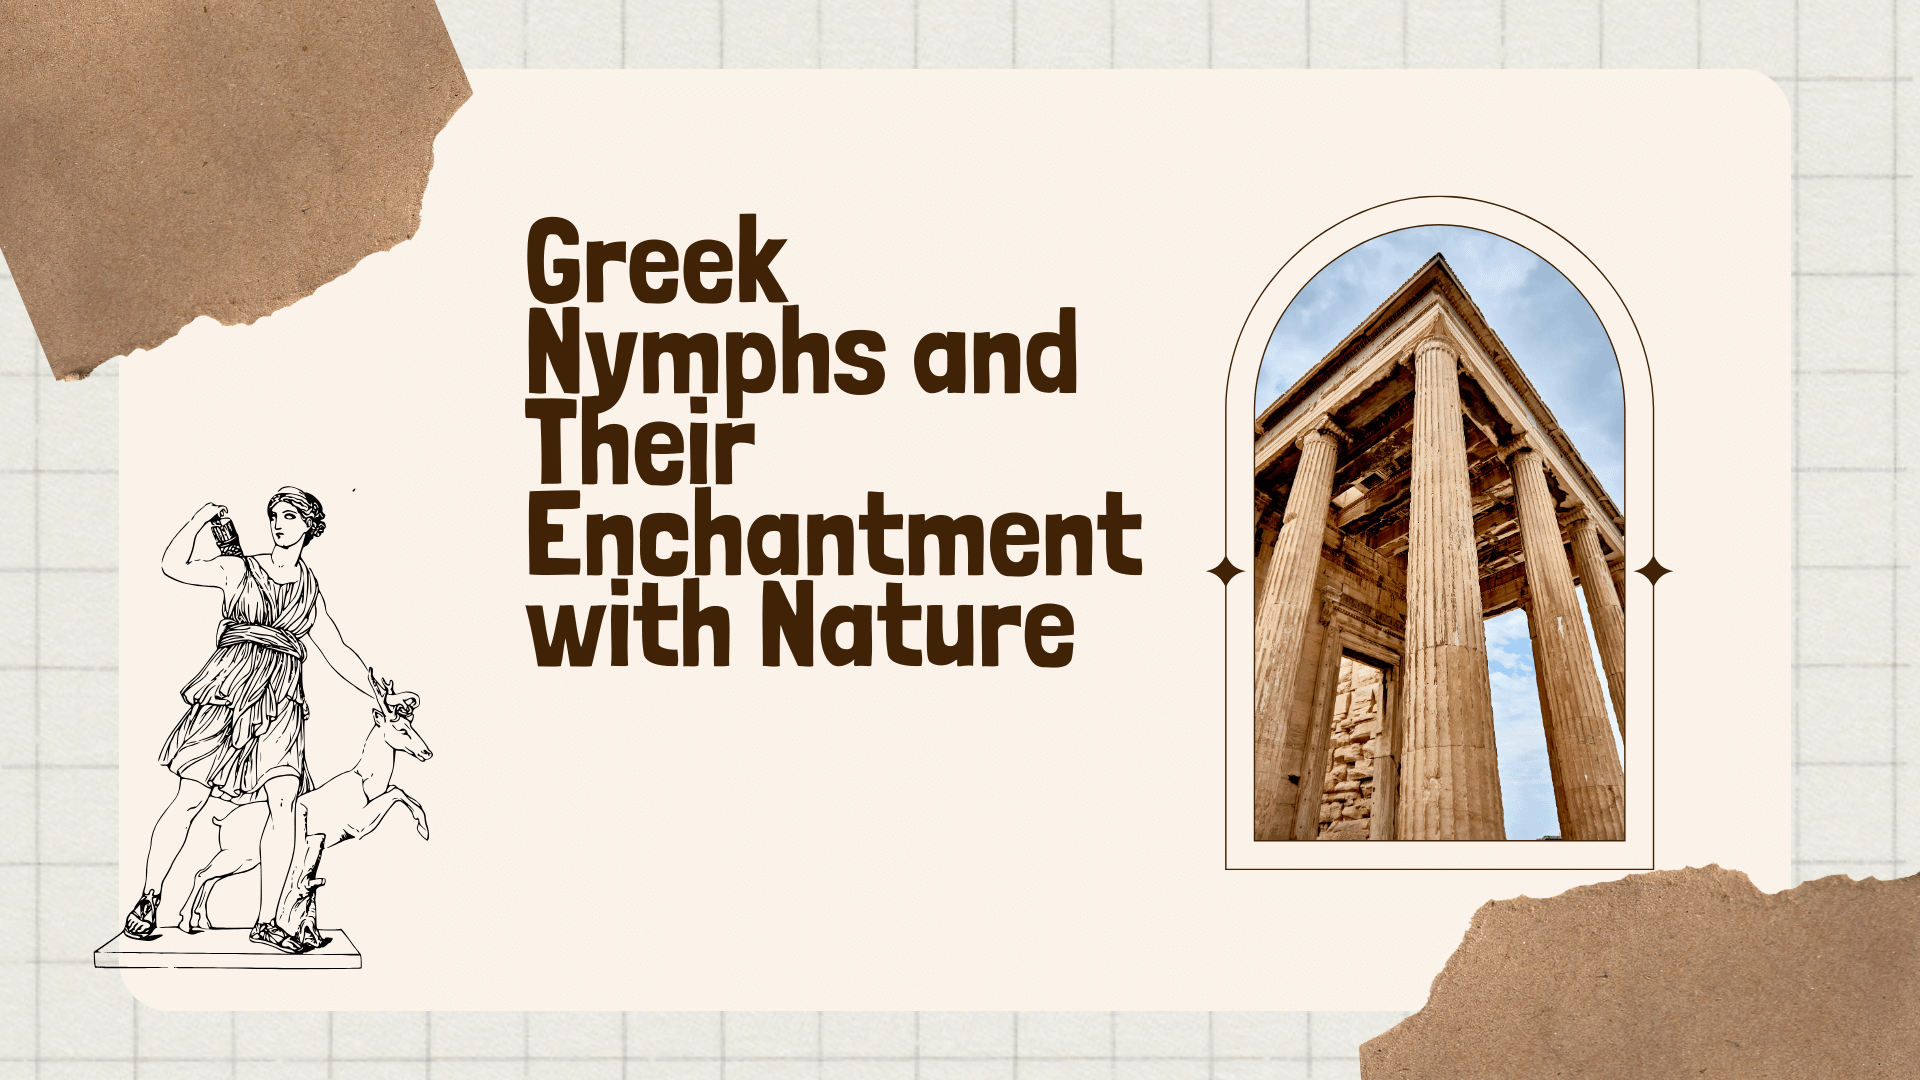 Greek Nymphs and Their Enchantment with Nature